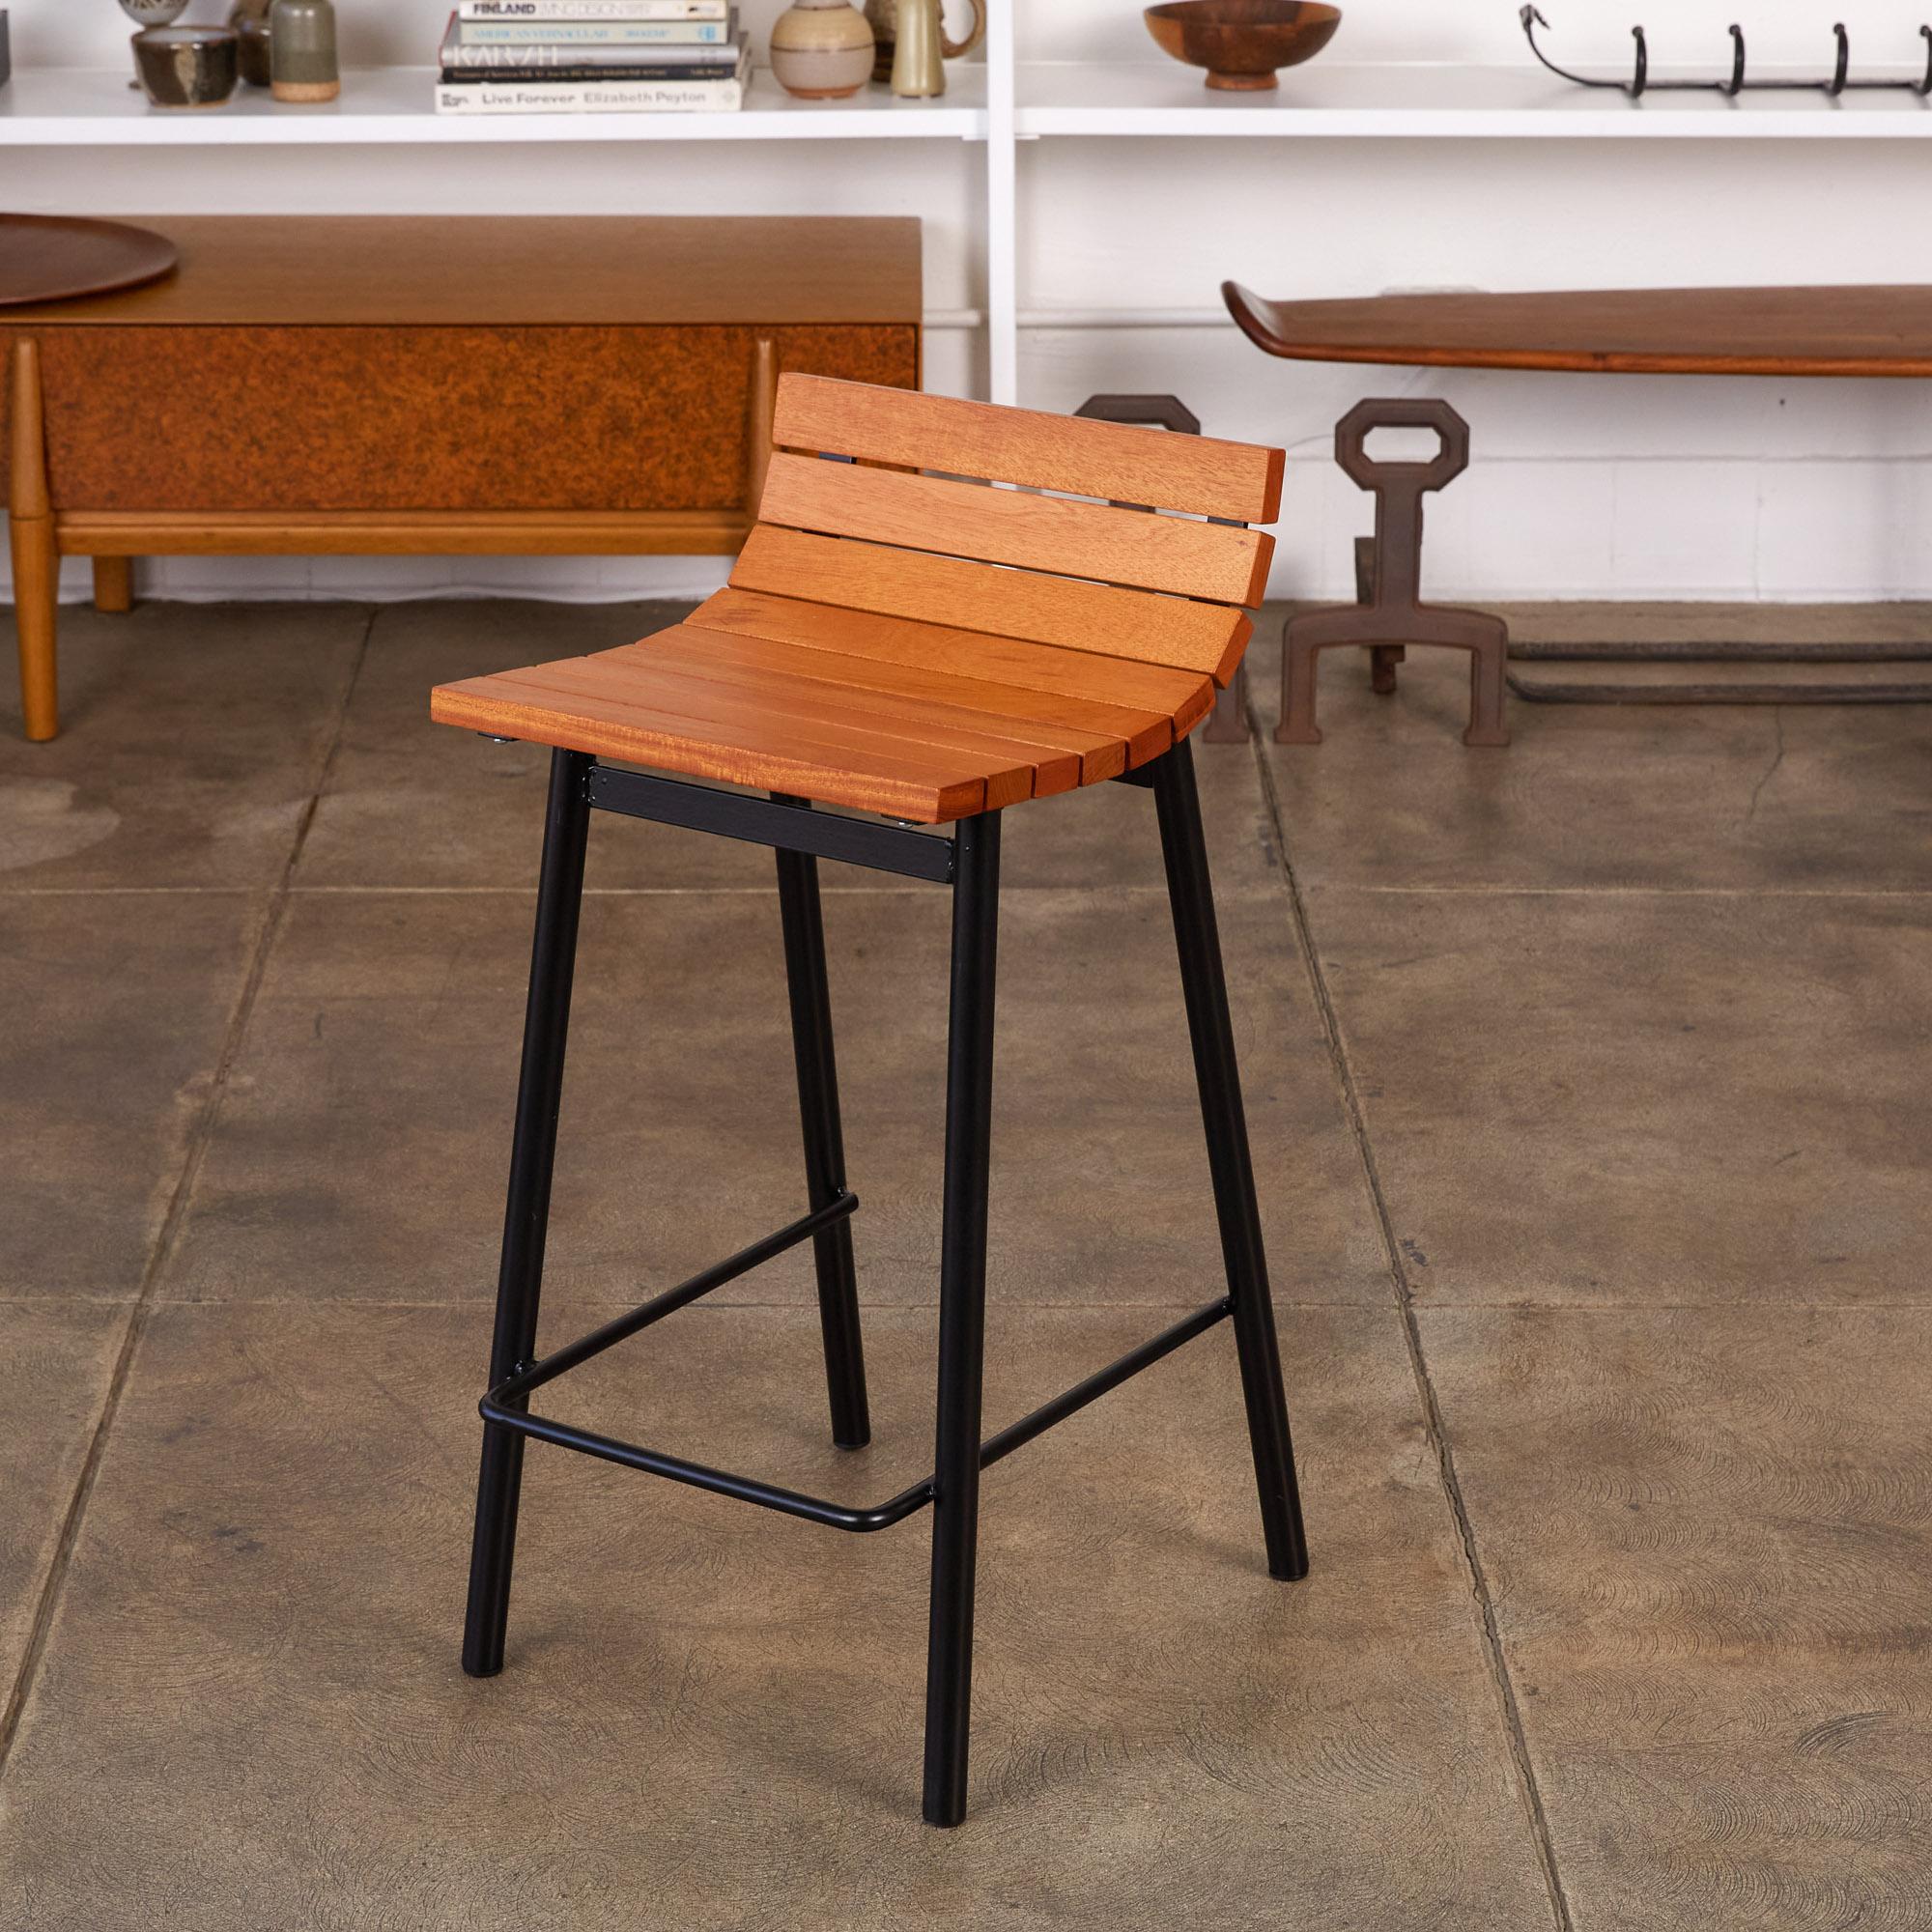 Counter stool by Vista of California, circa 1950s. This counter height stools feature newly powder coated tubular steel frames with a thinner strip of steel tubing serving as a mid-height structural support as well as a footrest. The stool also